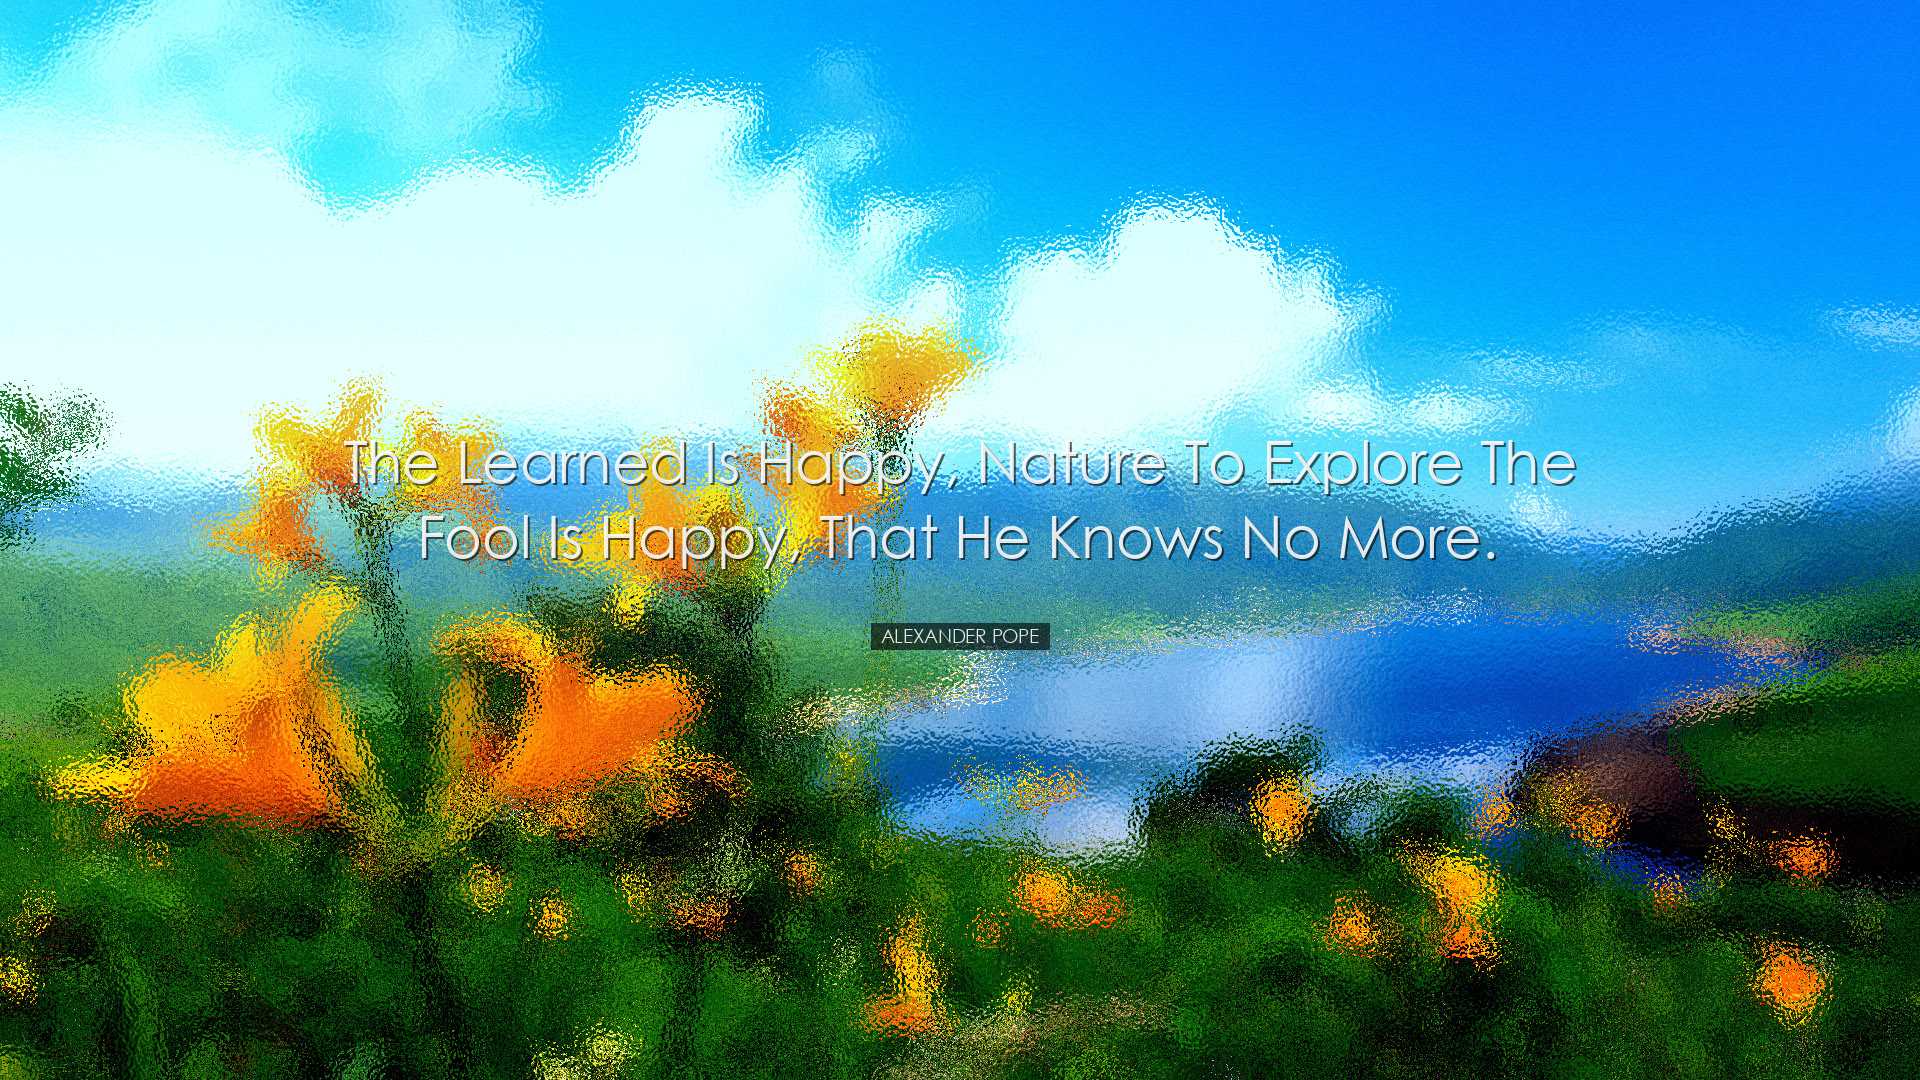 The learned is happy, nature to explore The fool is happy, that he